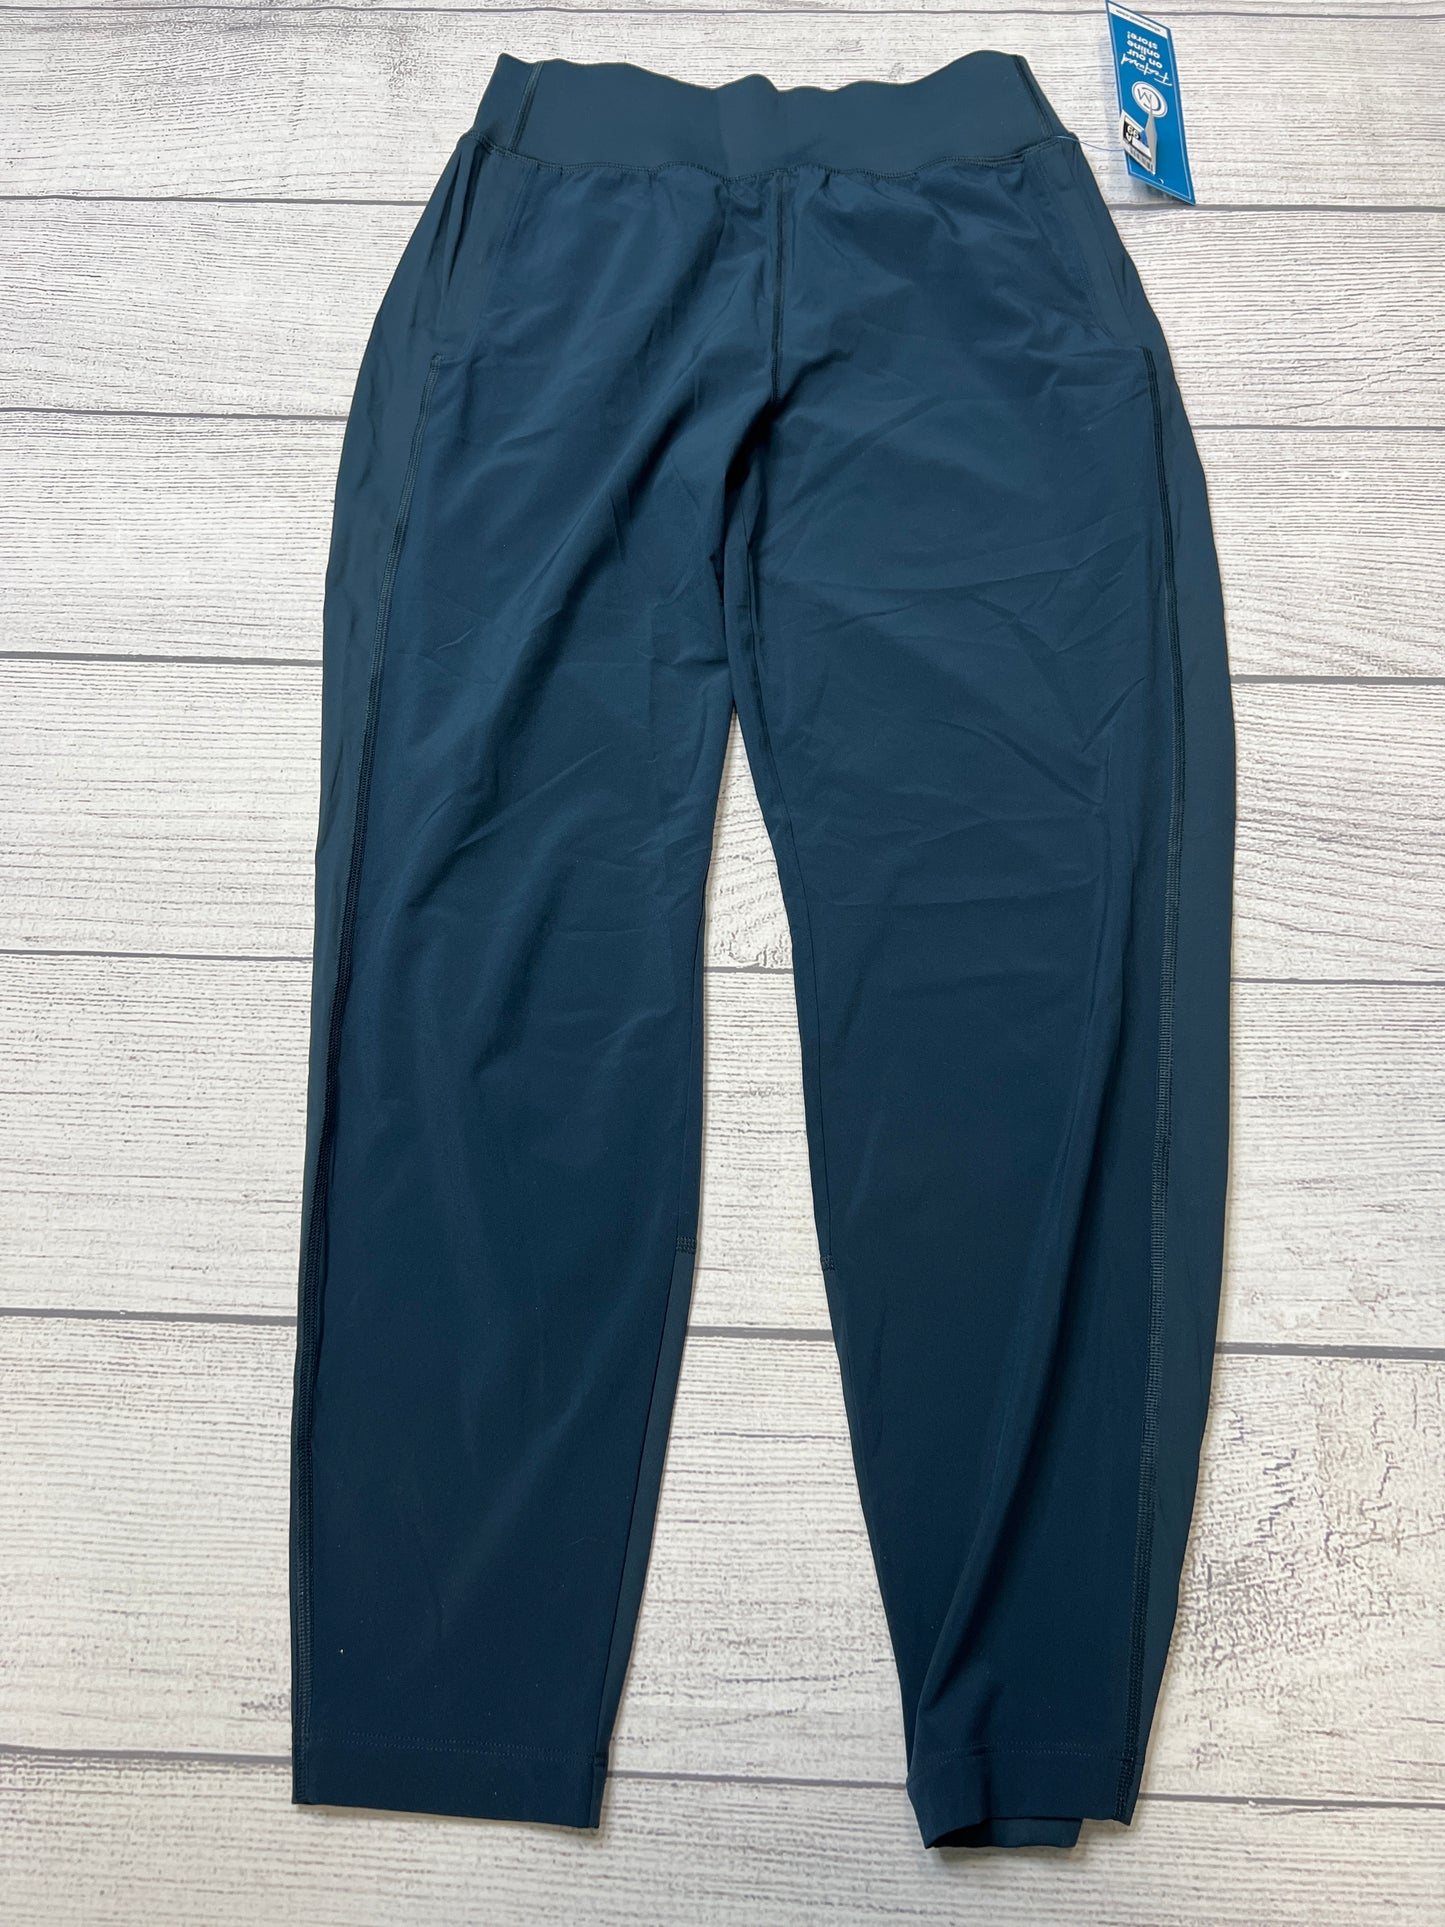 Athletic Pants By Athleta Size: S